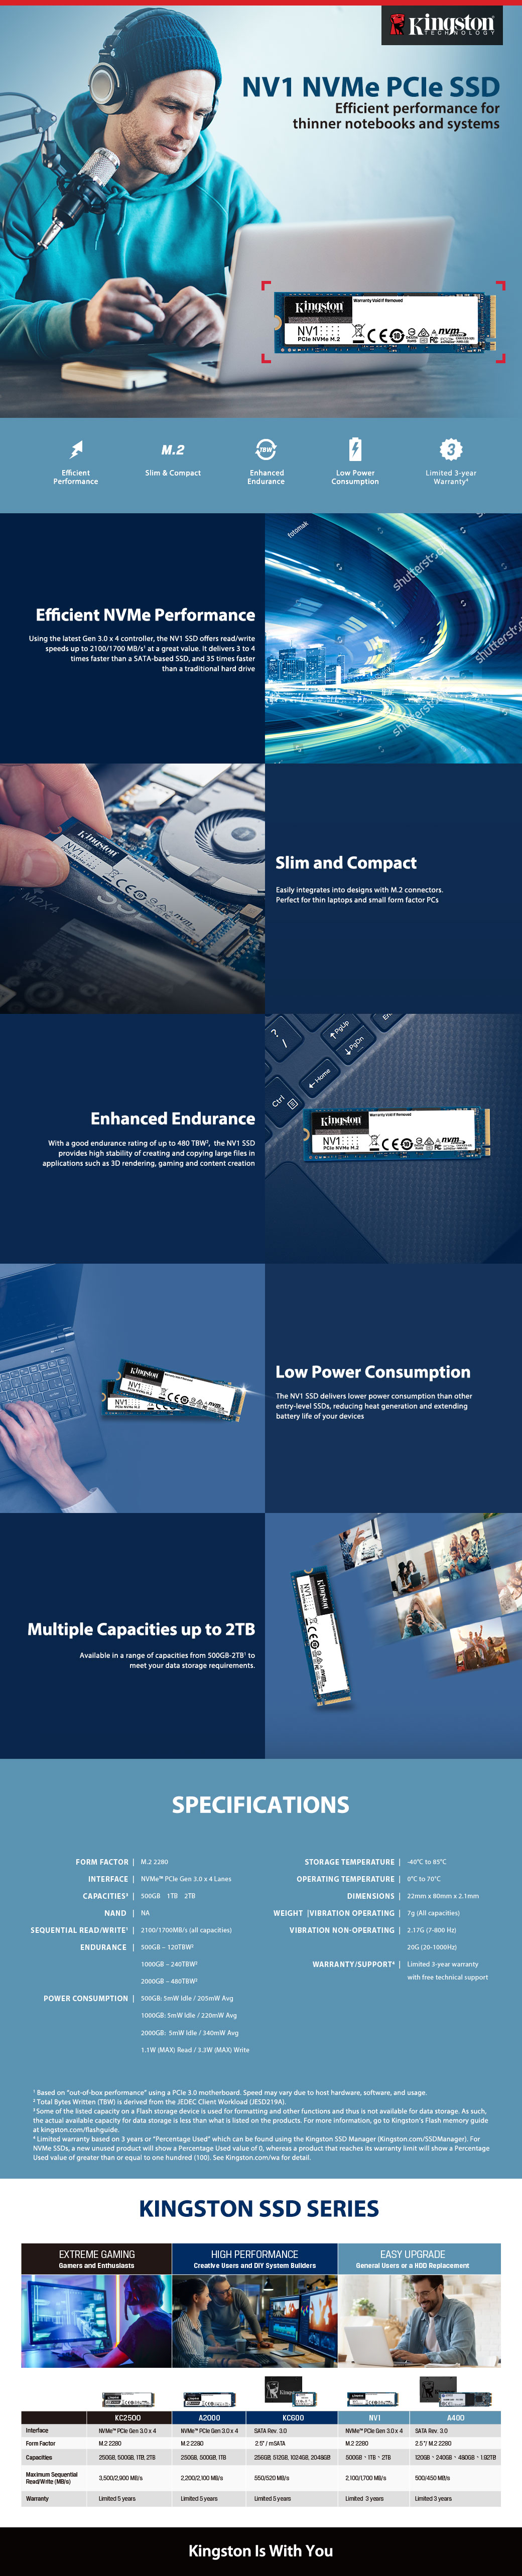 A large marketing image providing additional information about the product Kingston NV1 500GB NVMe M.2 SSD - Additional alt info not provided